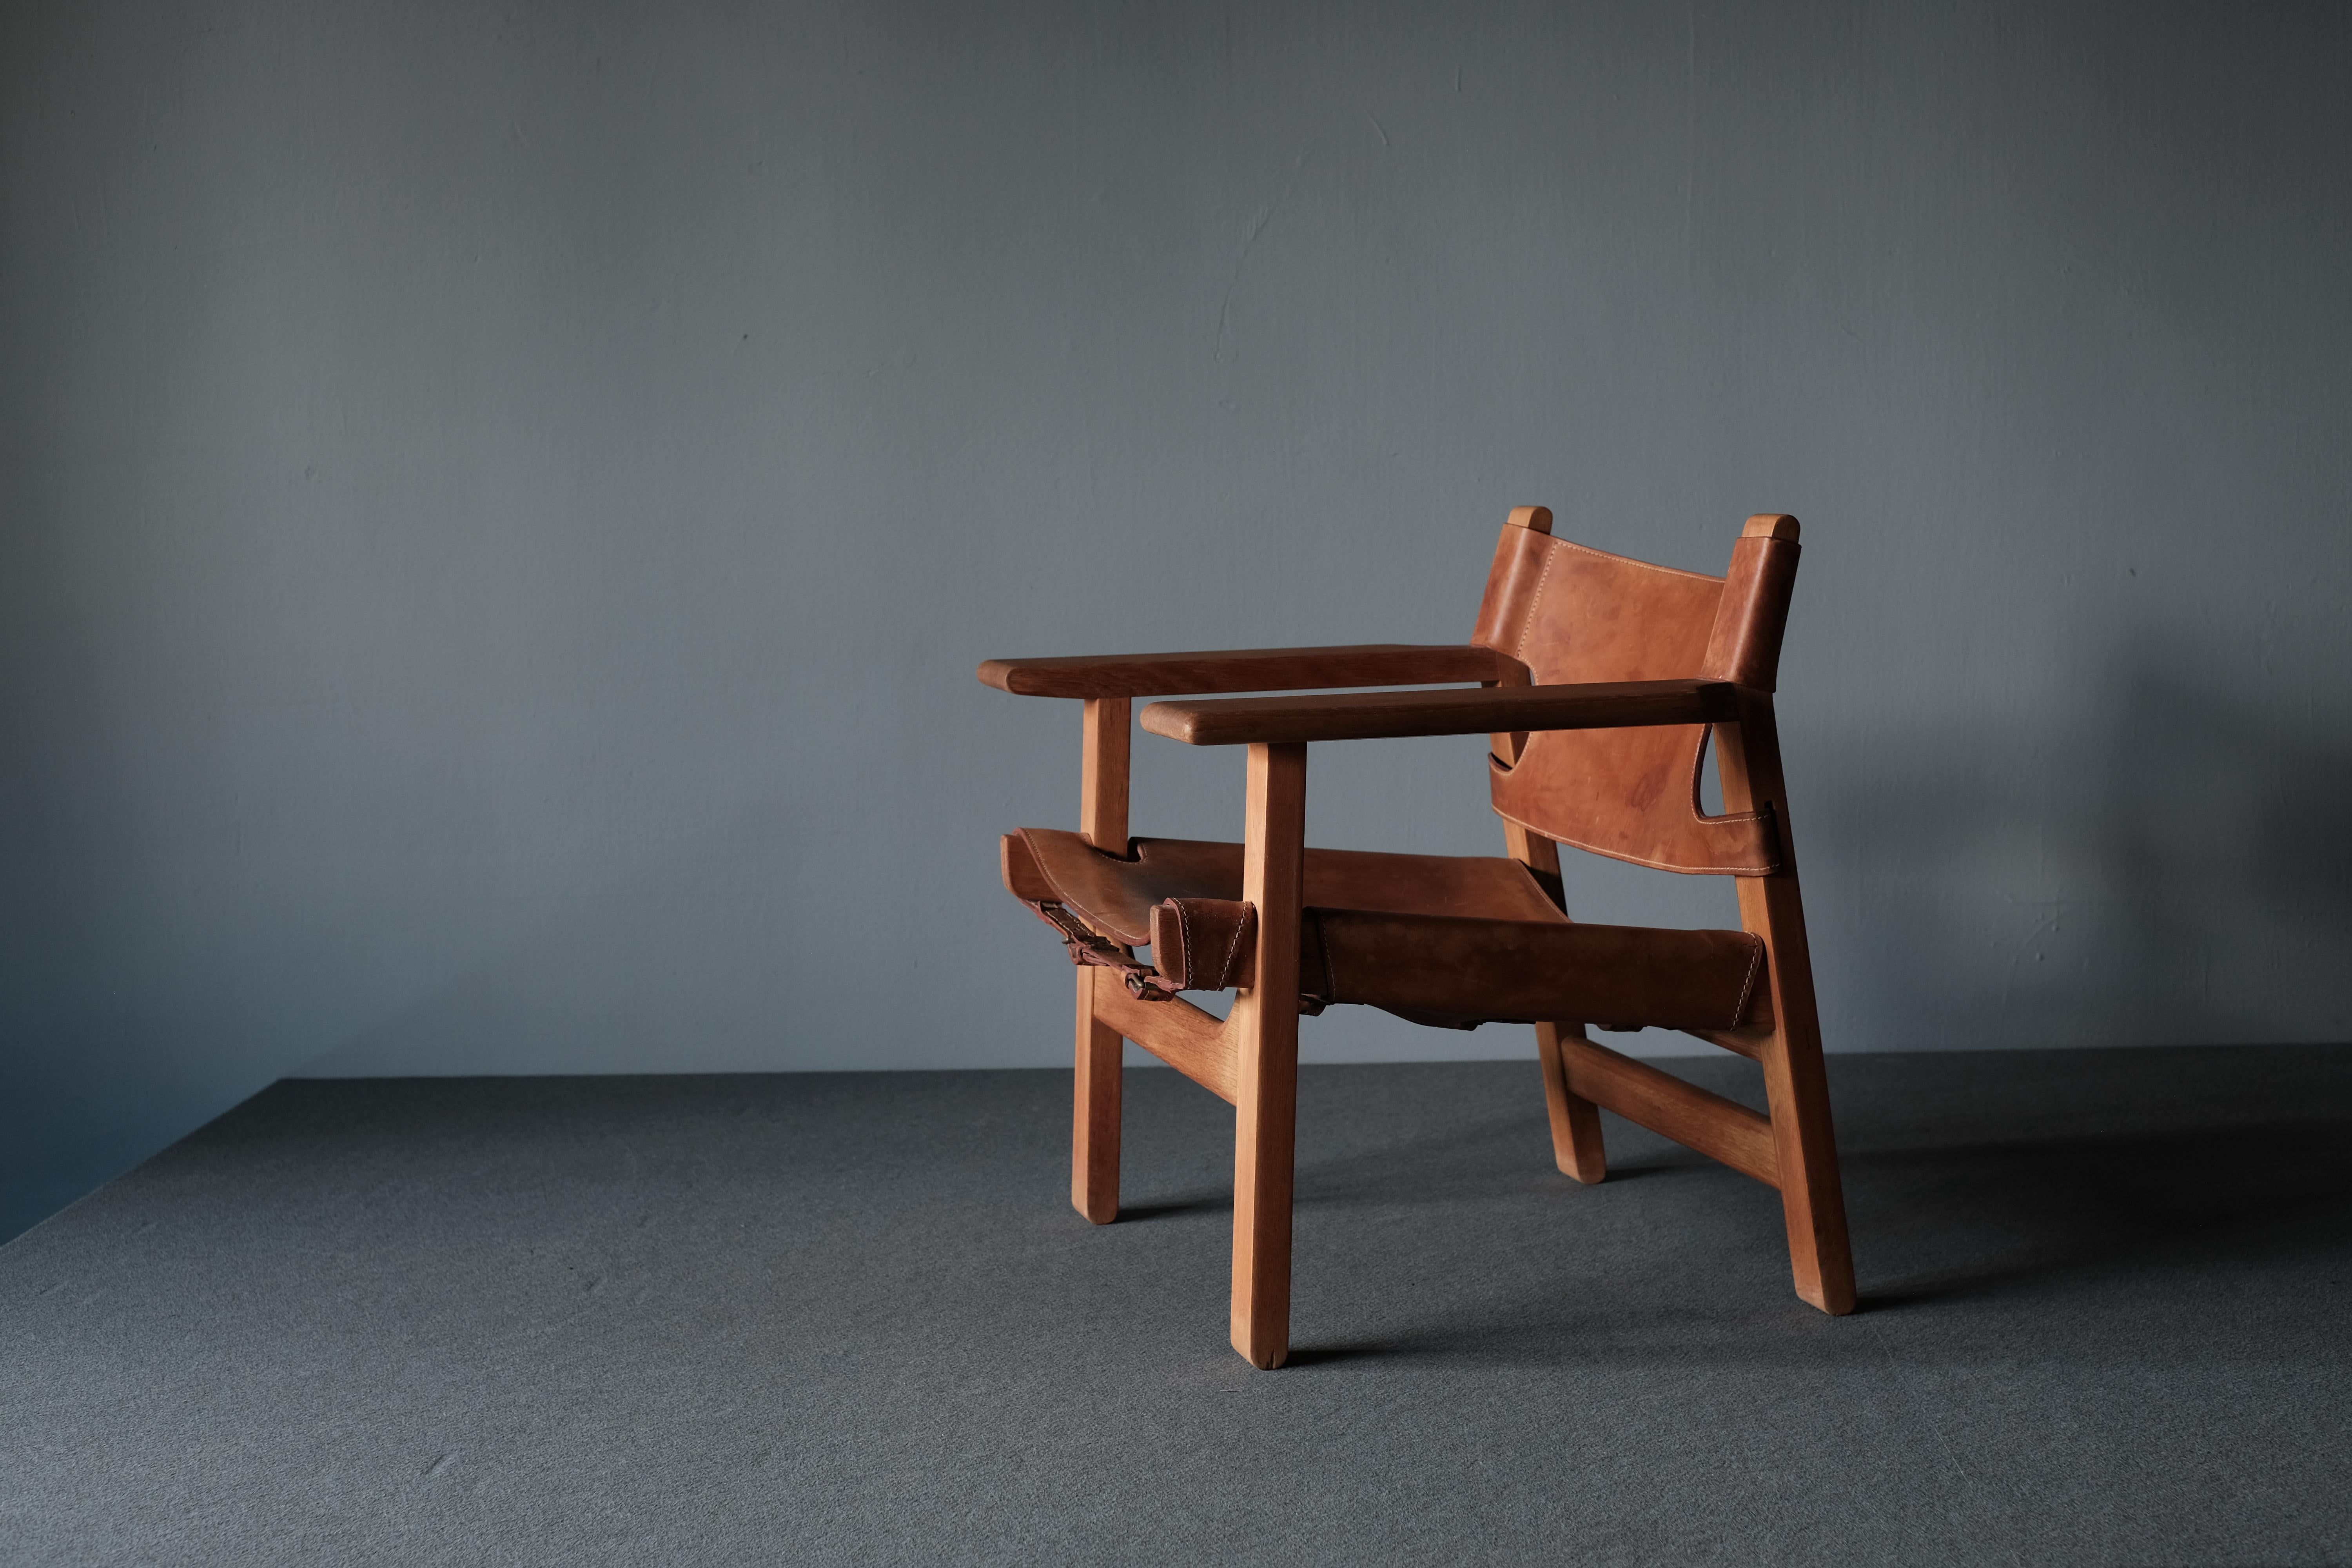 Spanish chair designed by Borge Mogensen in 1958 and produced by Fredericia. The chair’s gorgeously aged oak frames boast a lovely patina and finish. The hand stitching compliments the original high quality saddle leather which has taken on the